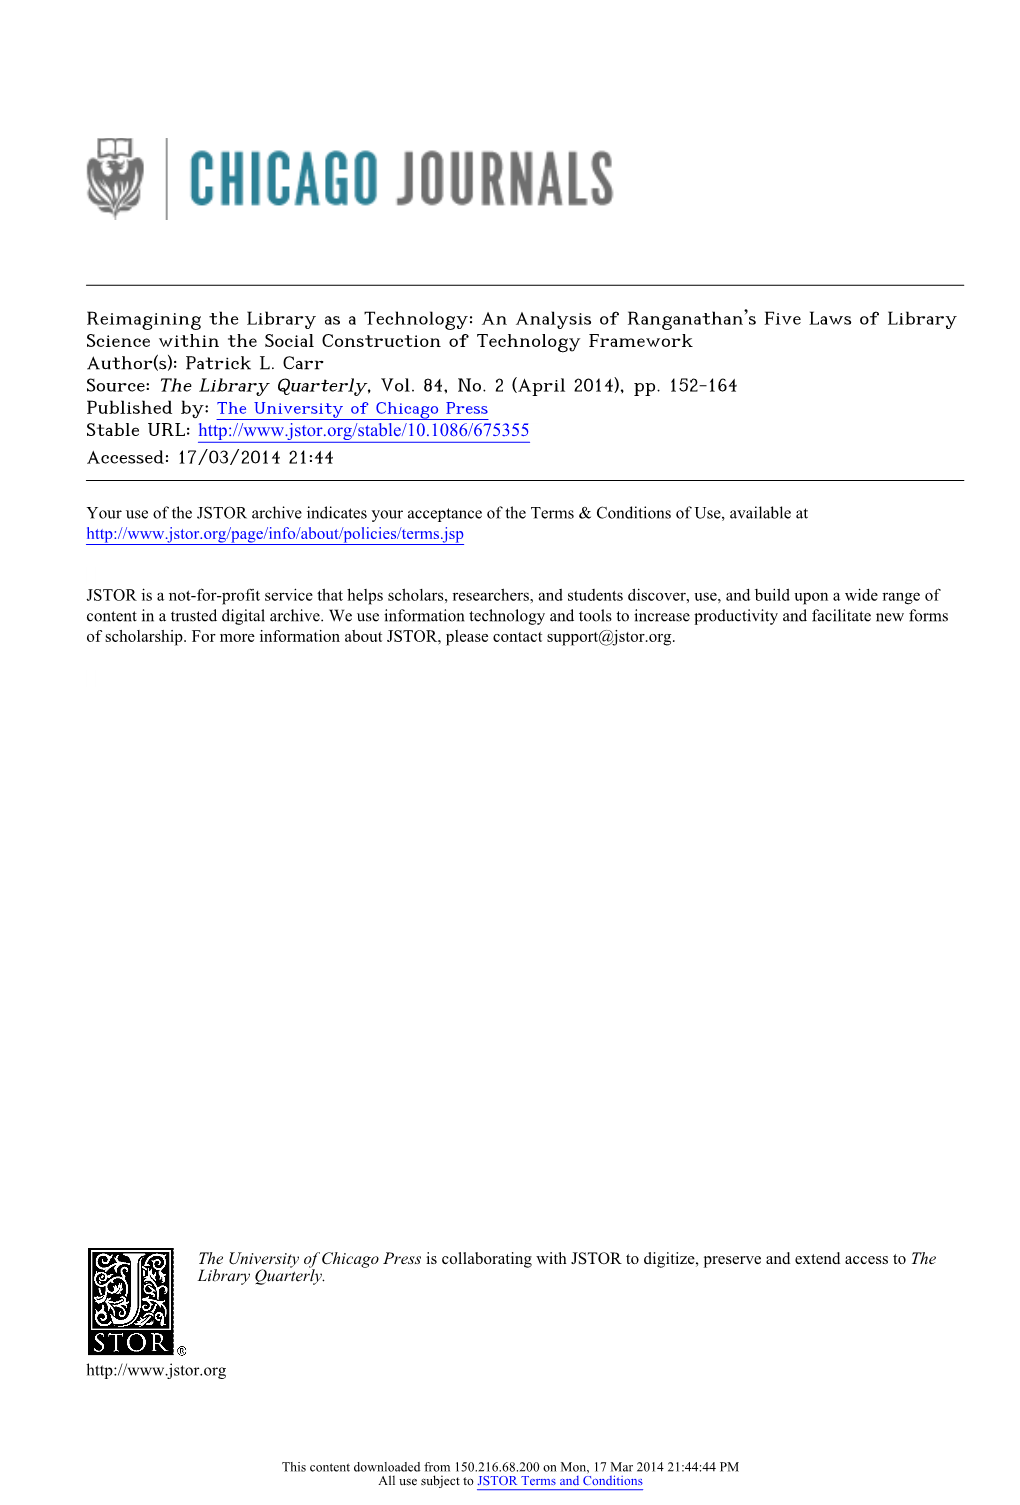 An Analysis of Ranganathan's Five Laws of Library Science Within The